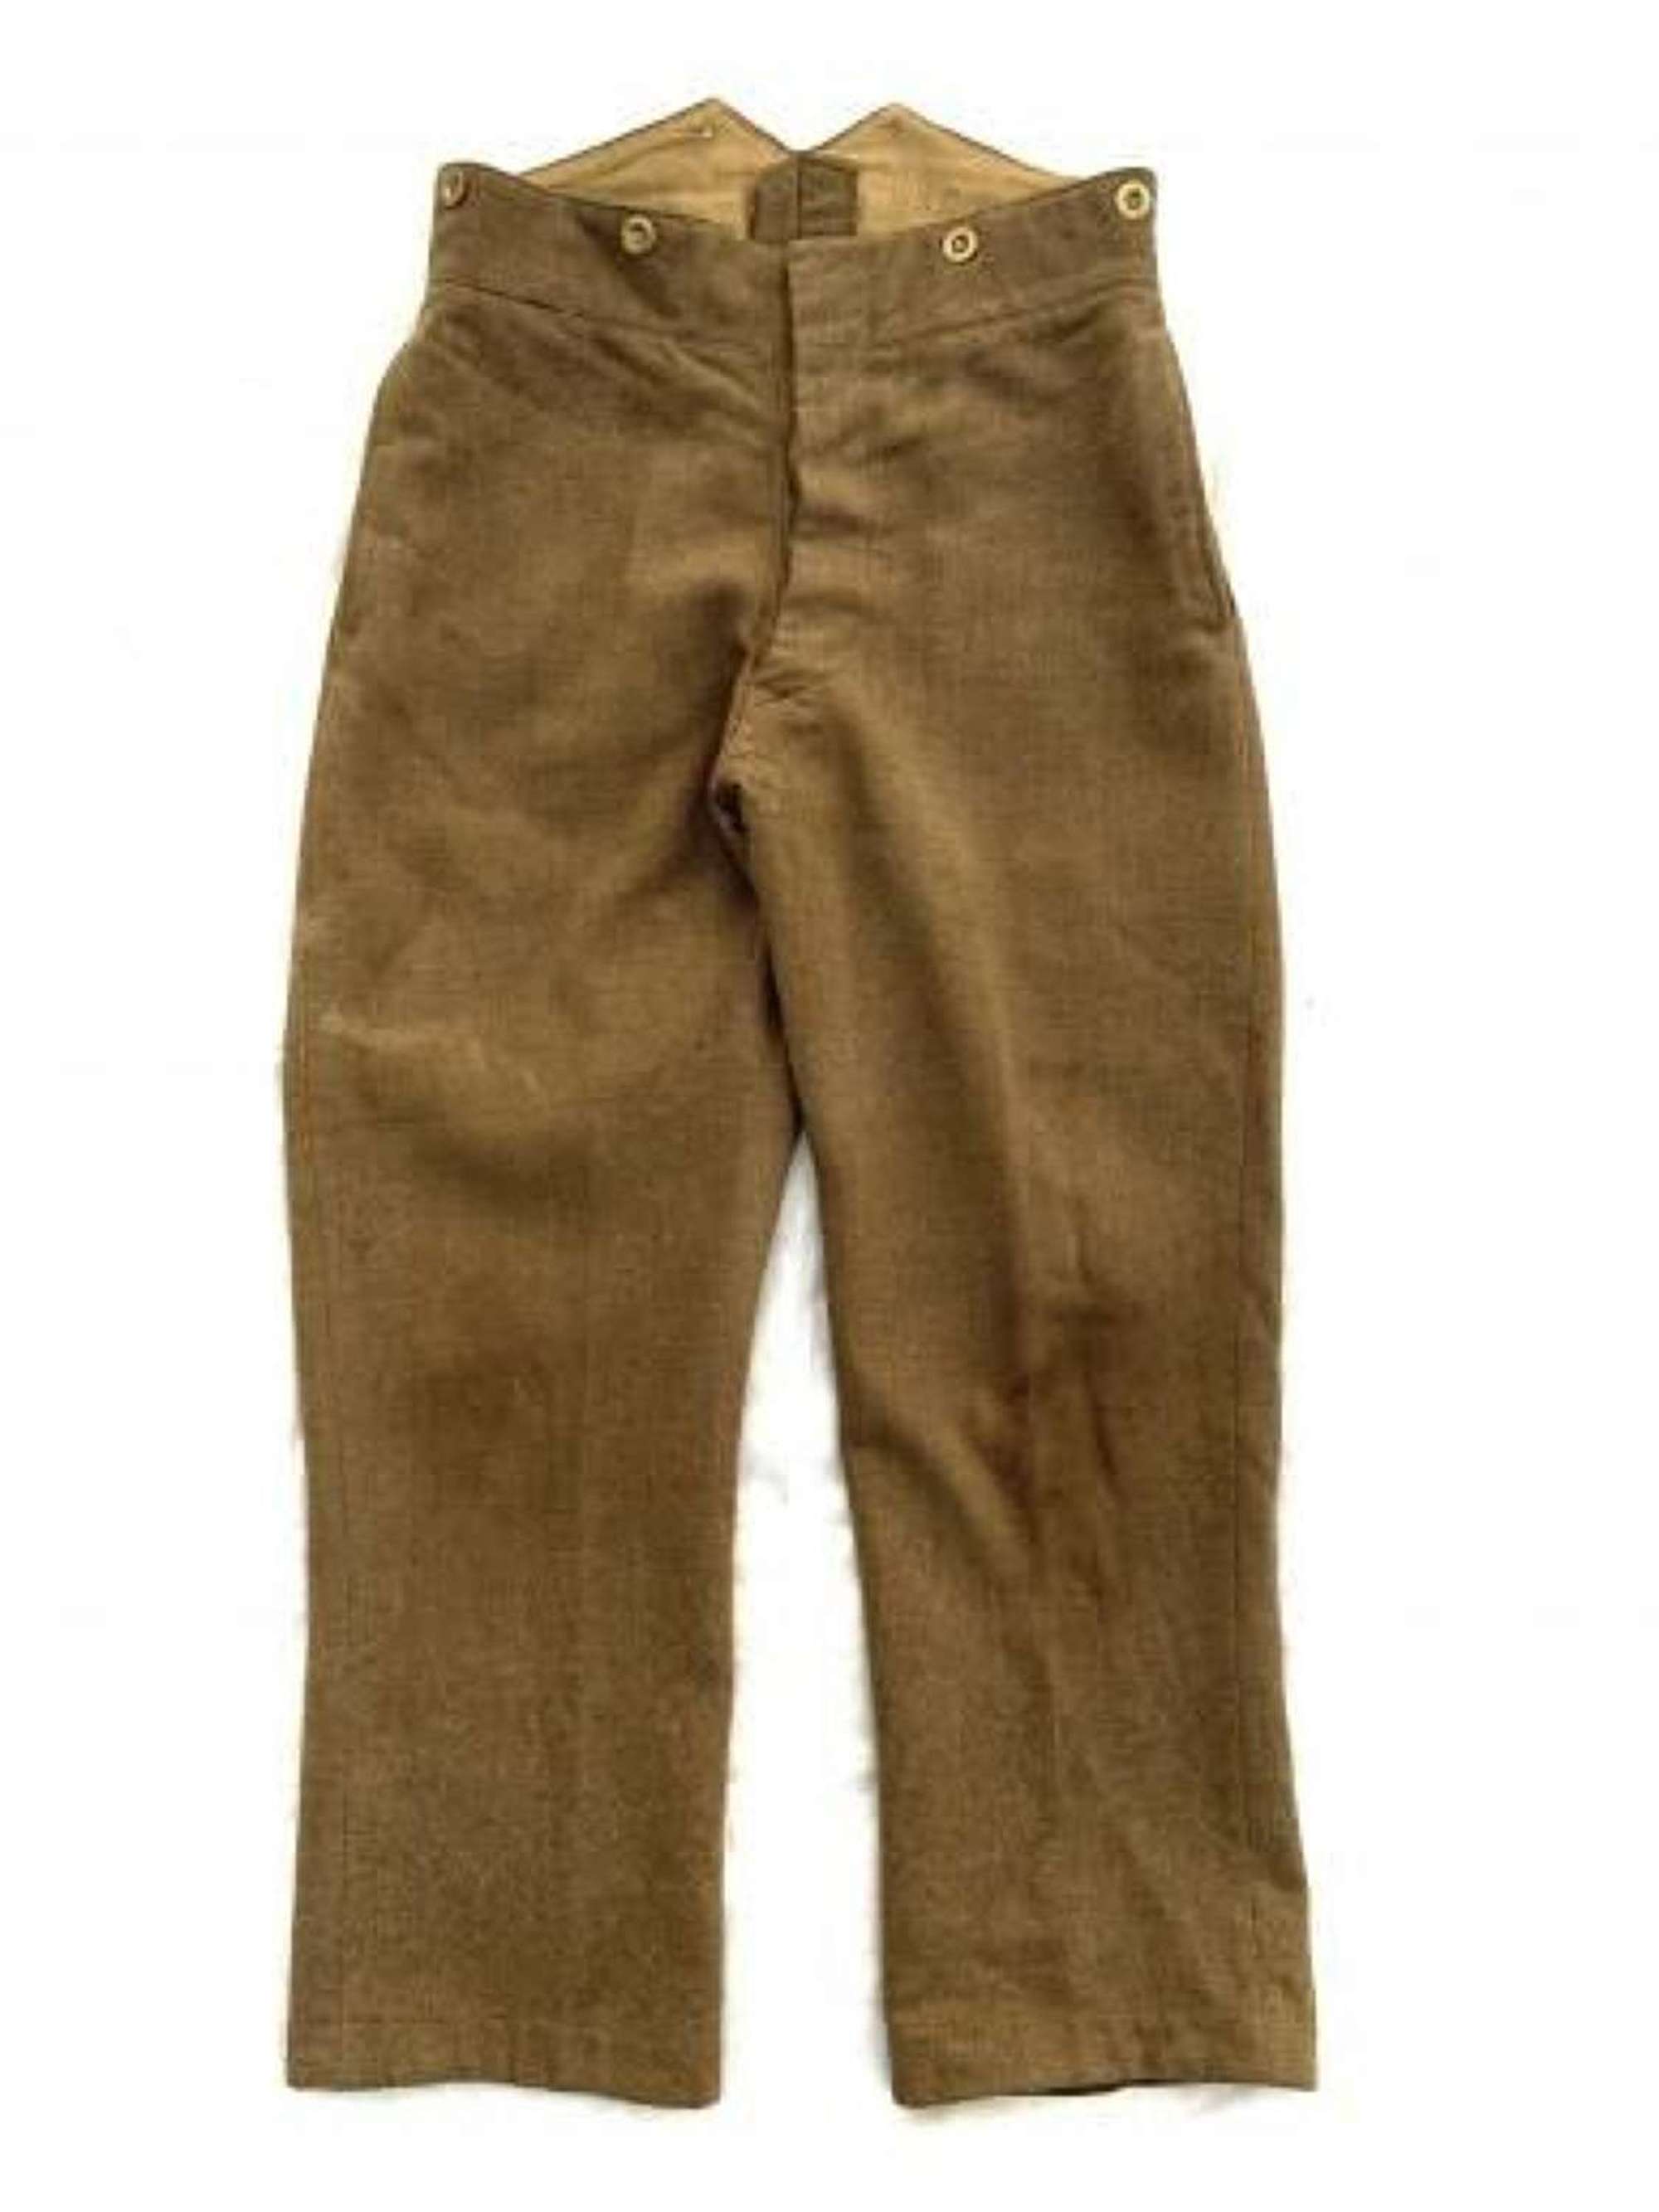 Original 1942 Dated British Army Service Dress Trousers